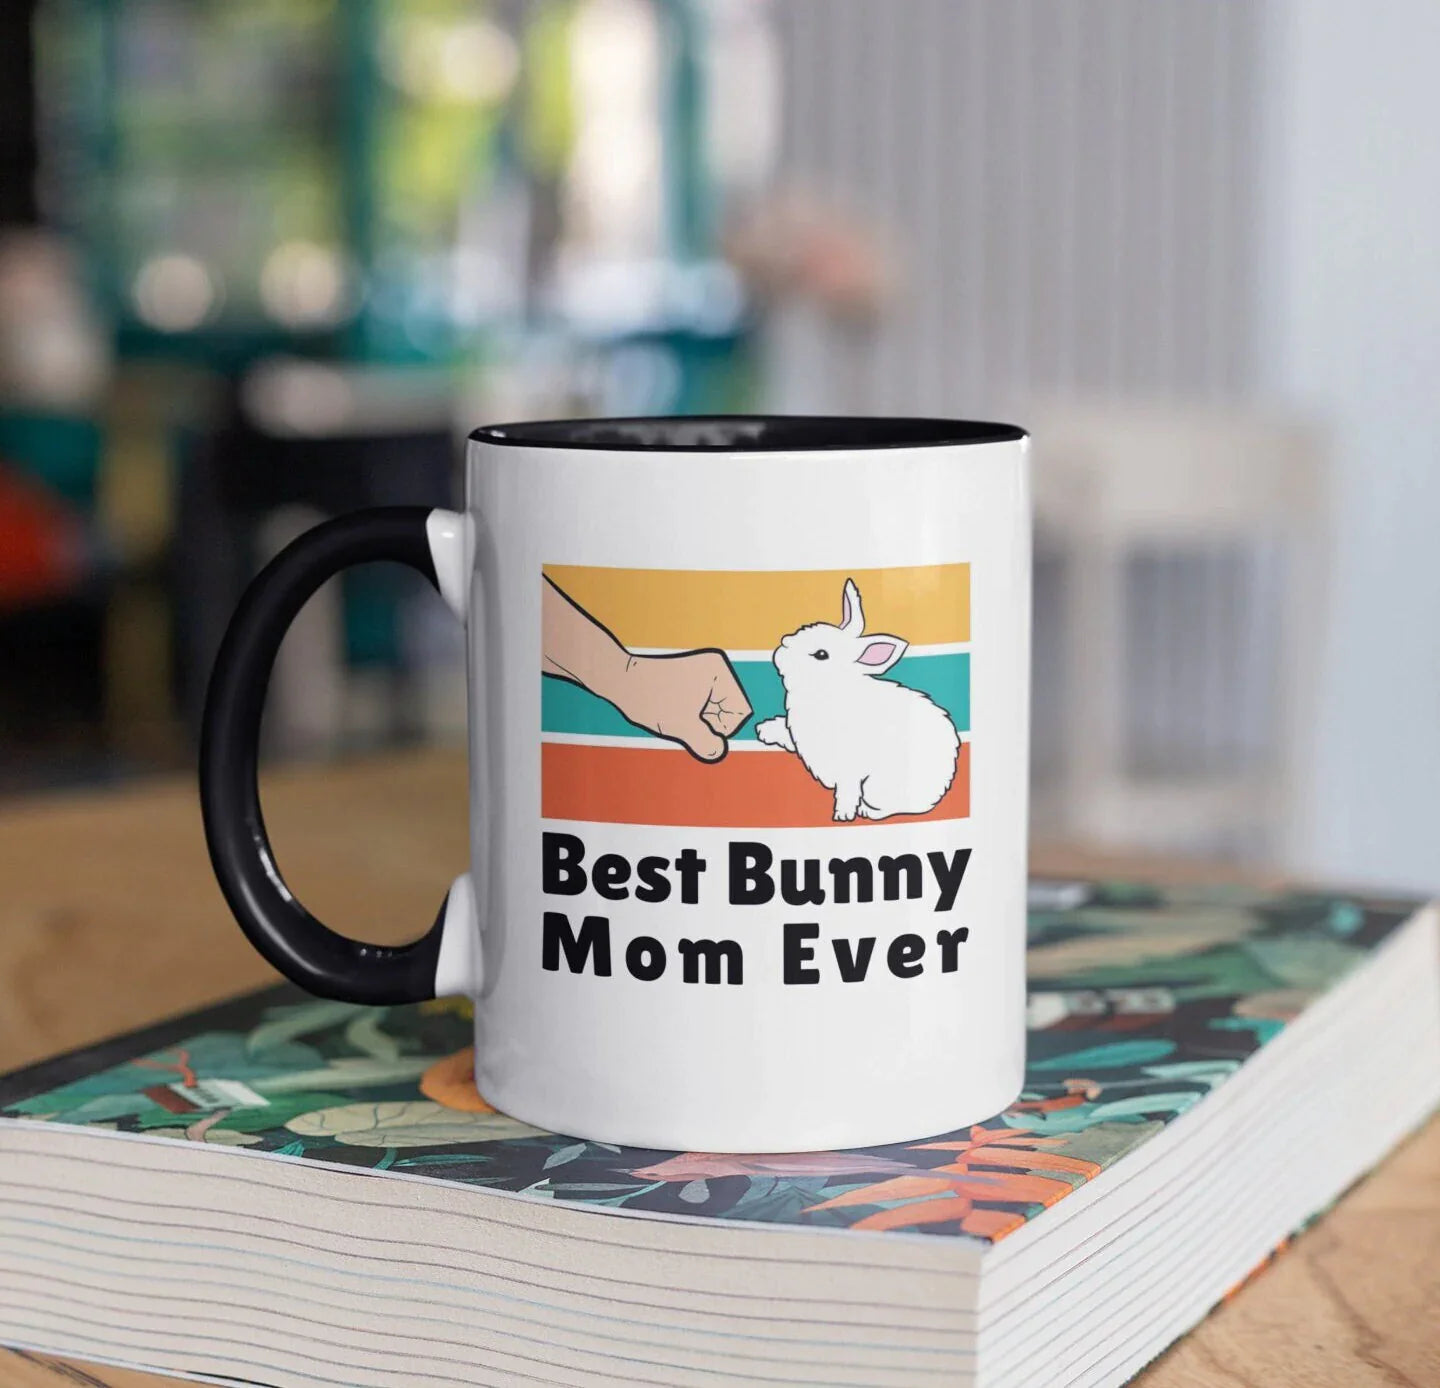 coffee mug with an image of a bunny fist bumping and the text "best bunny mom ever"